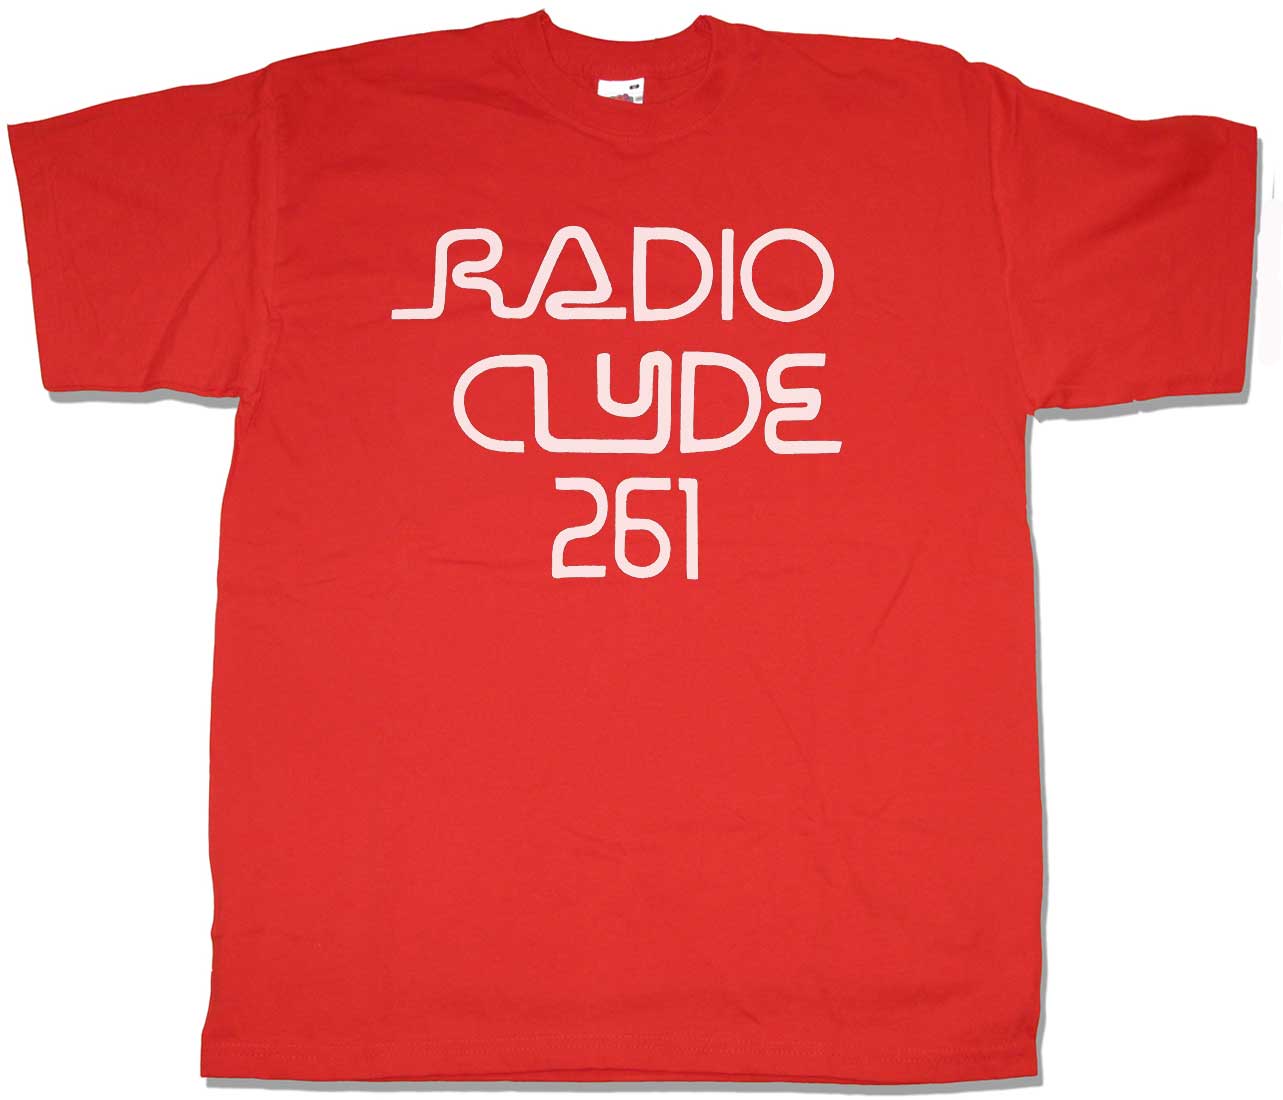 As worn by Frank Zappa T shirt - Radio Clyde 261